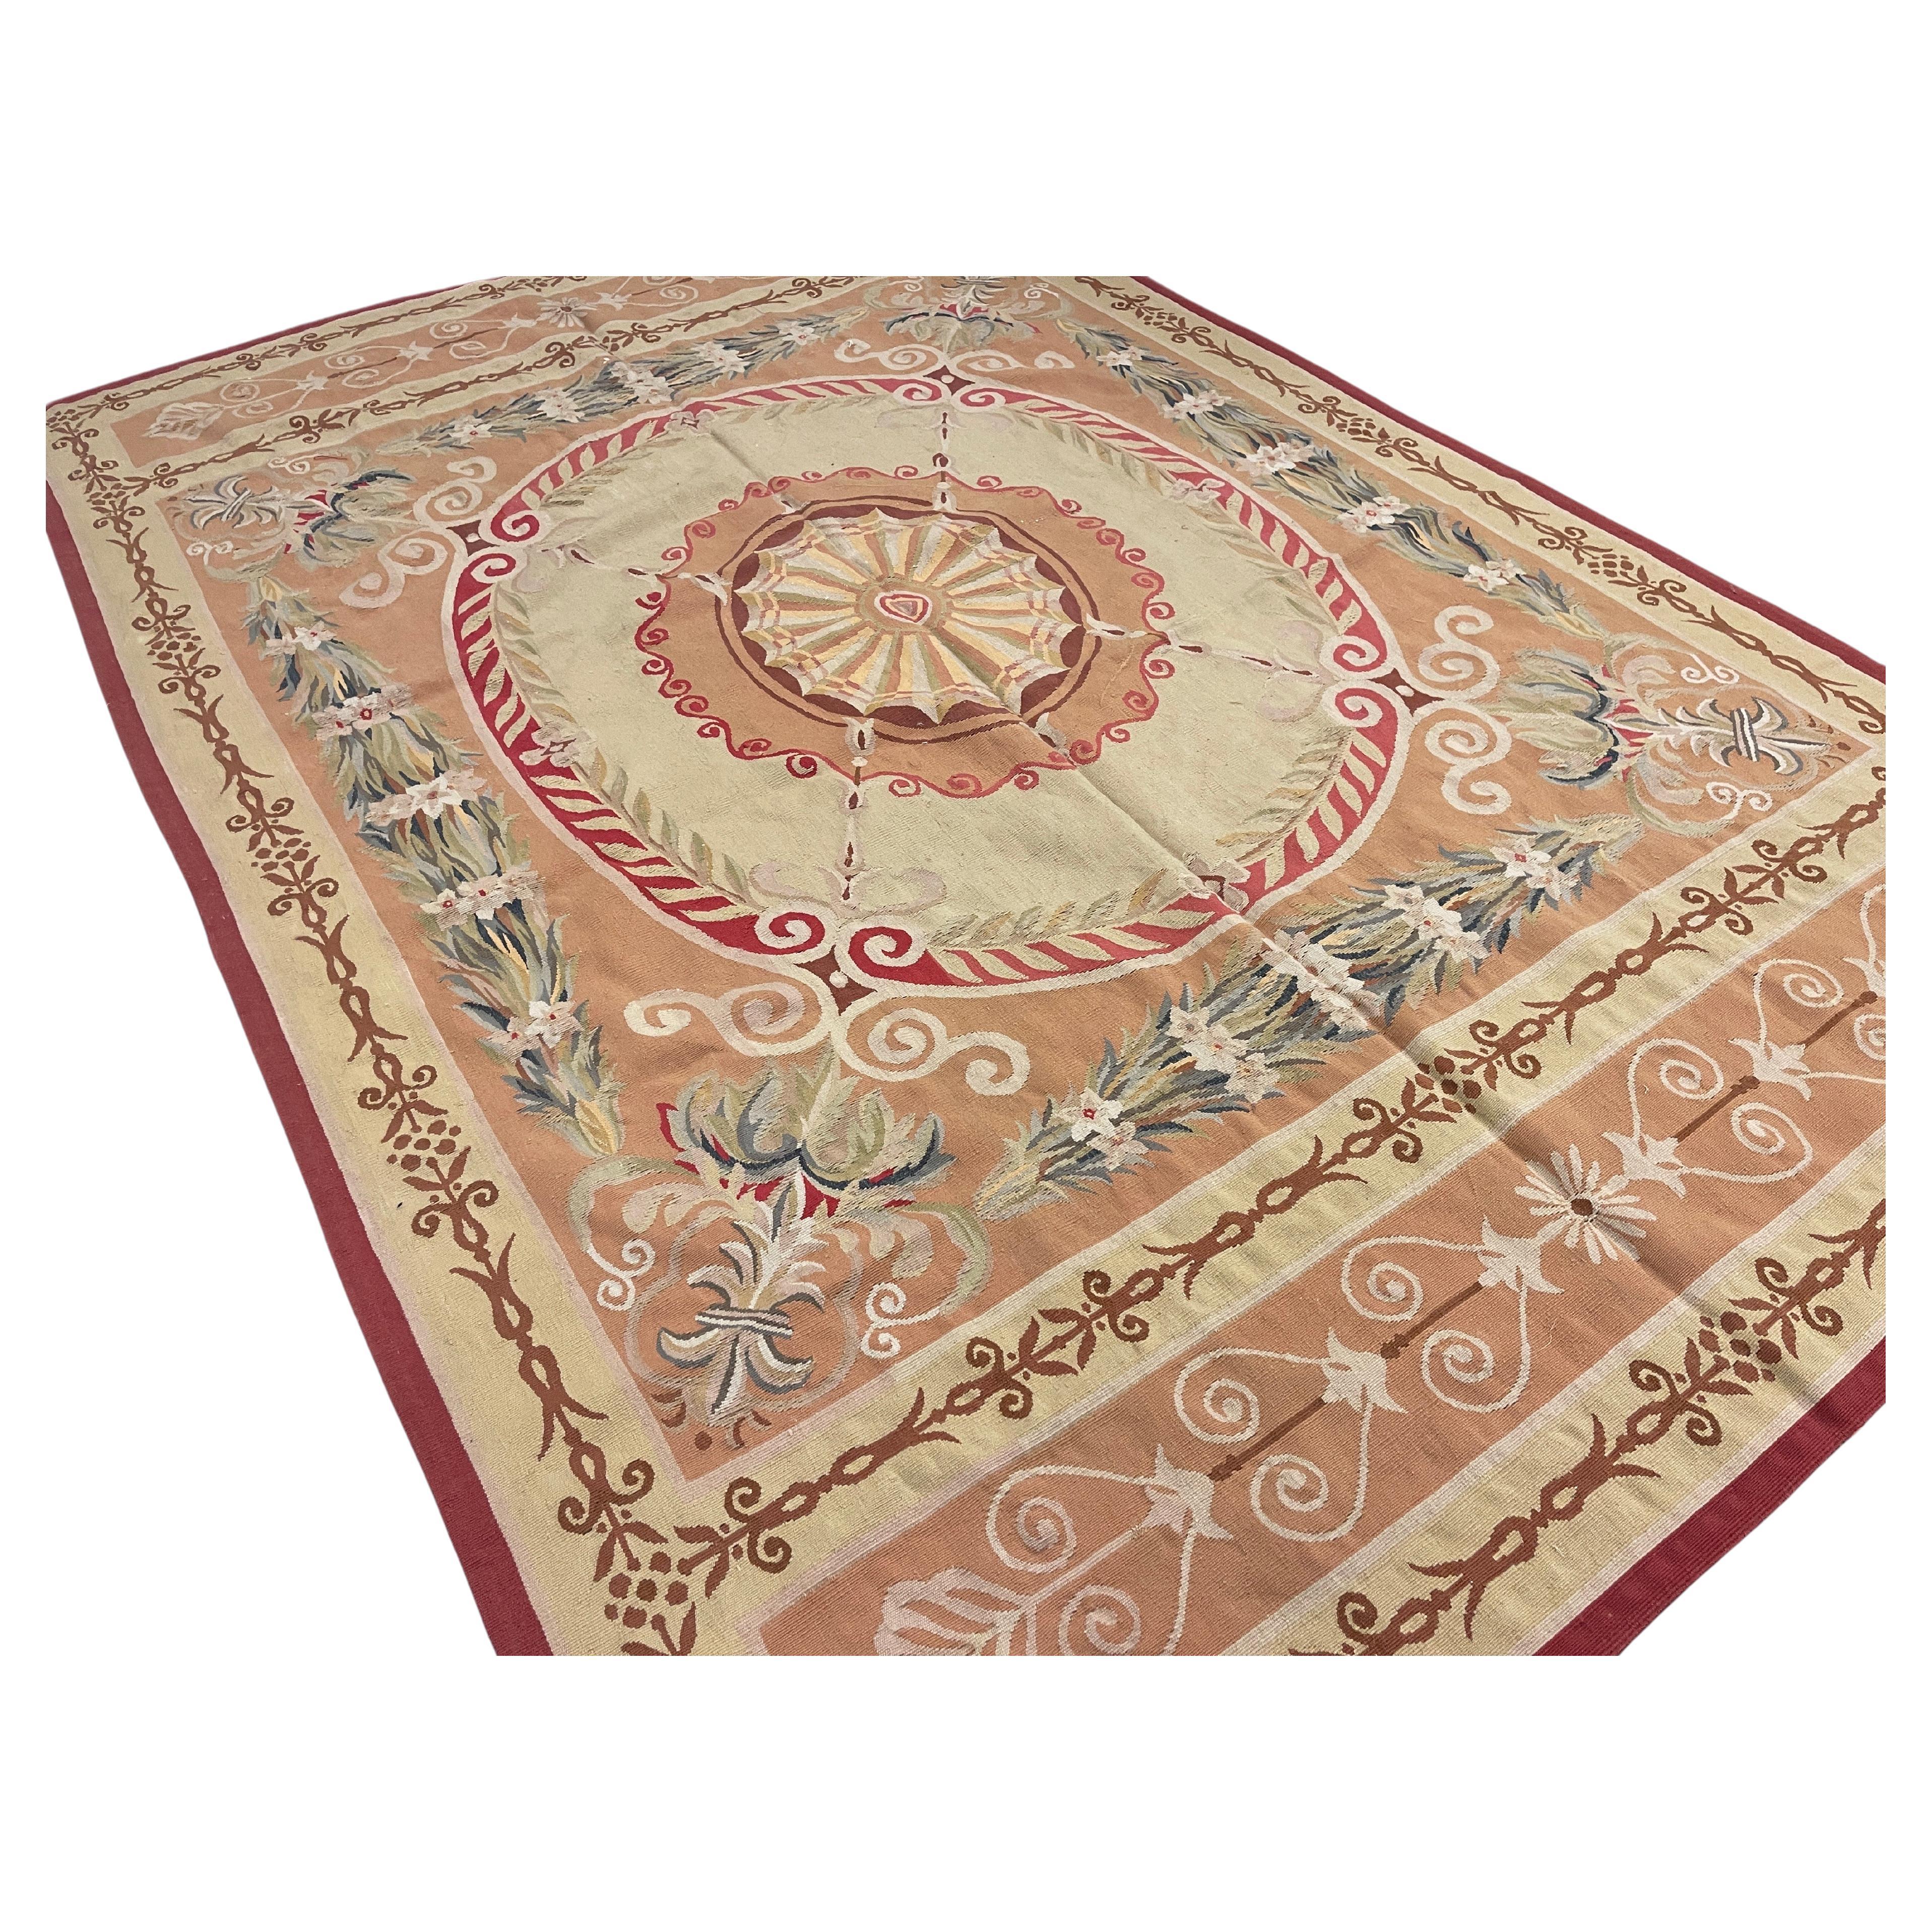 This fantastic area rug has been handwoven with a beautiful symmetrical floral design woven on an ivory rust background with Beige, red, cream green and ivory accents. This elegant piece's colour and design make it the perfect accent rug.
This style